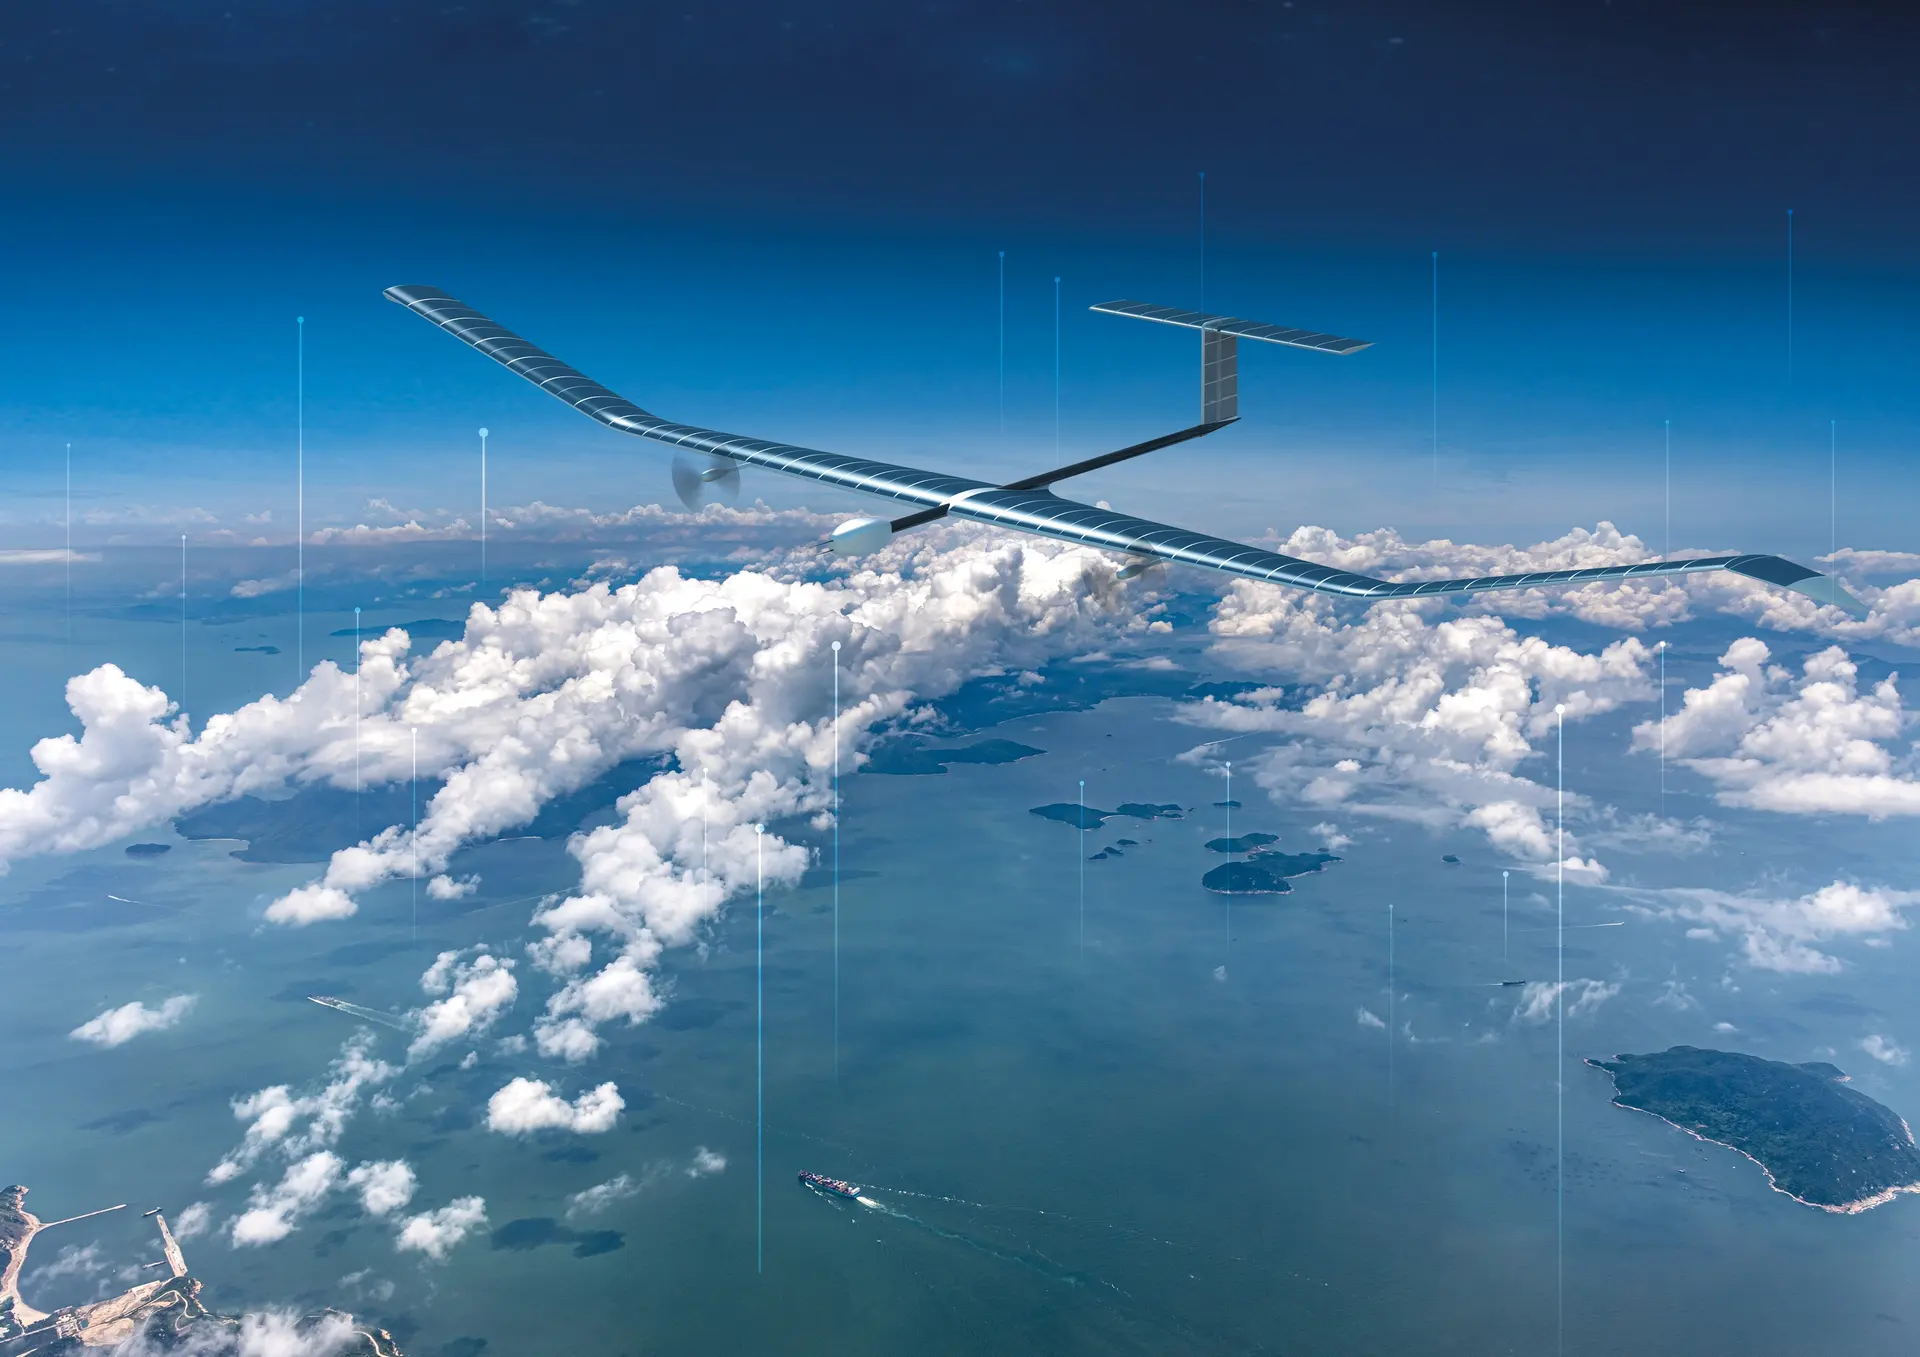 Zephyr drone with solar panels set new record for flight time